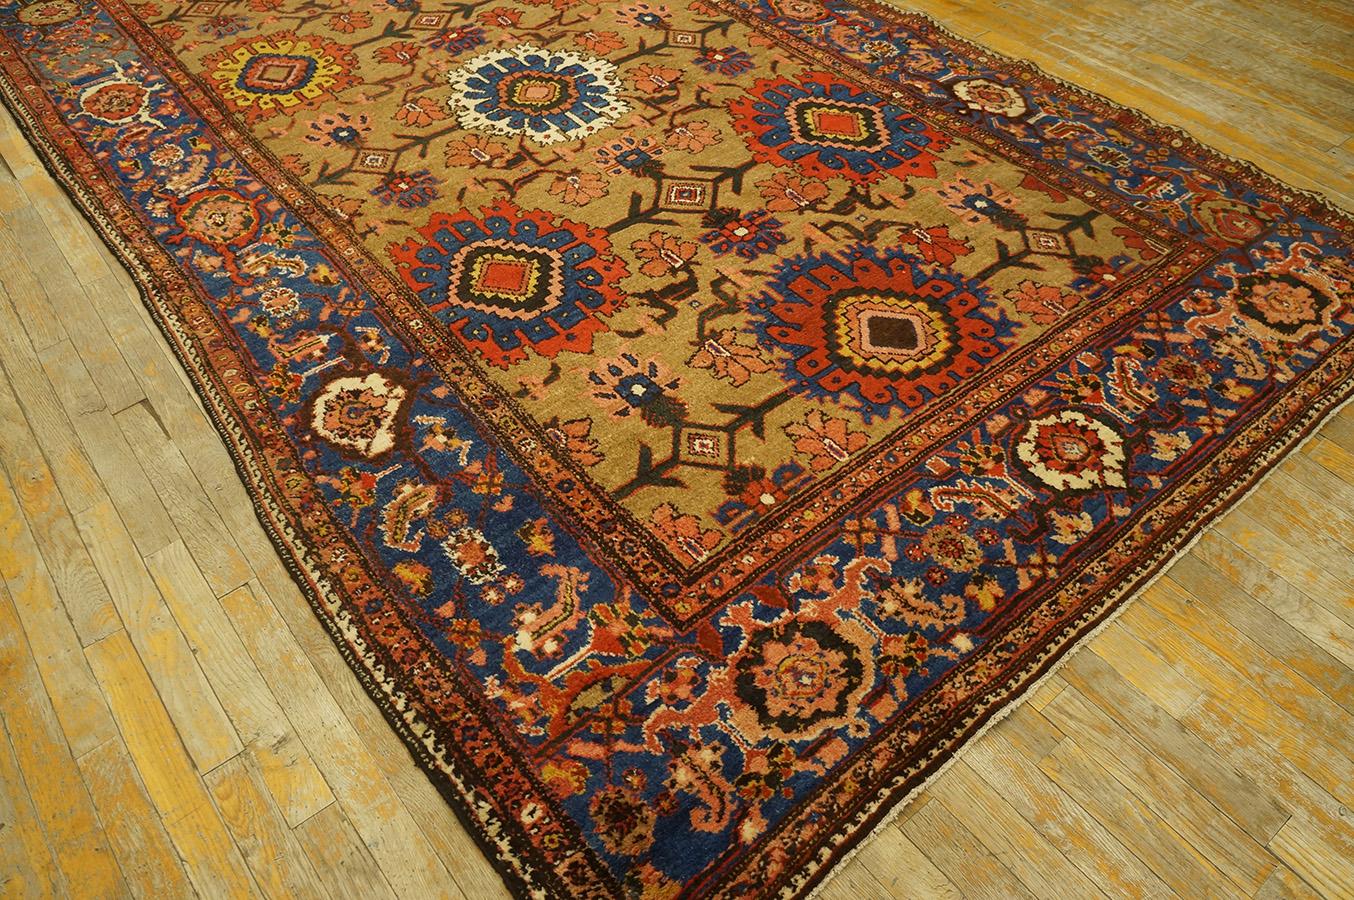 Hand-Knotted Late 19th Century Persian Bakhtiari Gallery Carpet (6'2